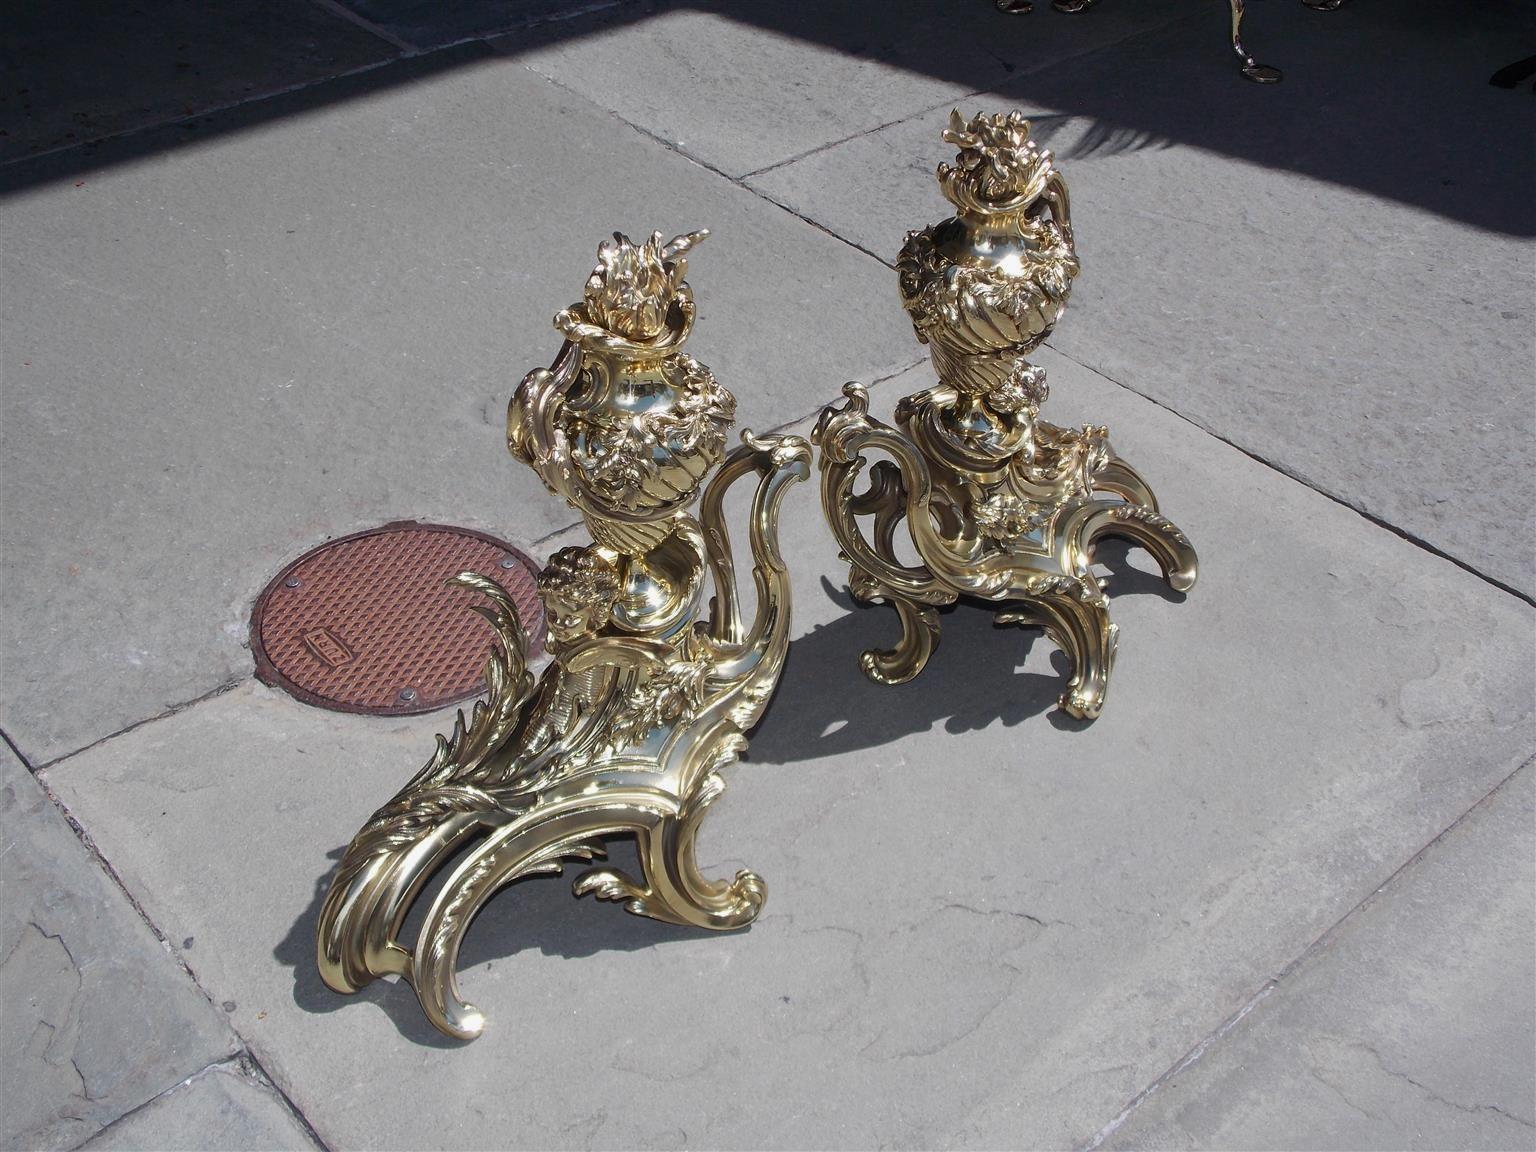 Pair of French brass flame urn finial chenets with flanking winged cherubs and decorative scrolled floral motif, Early 19th century.